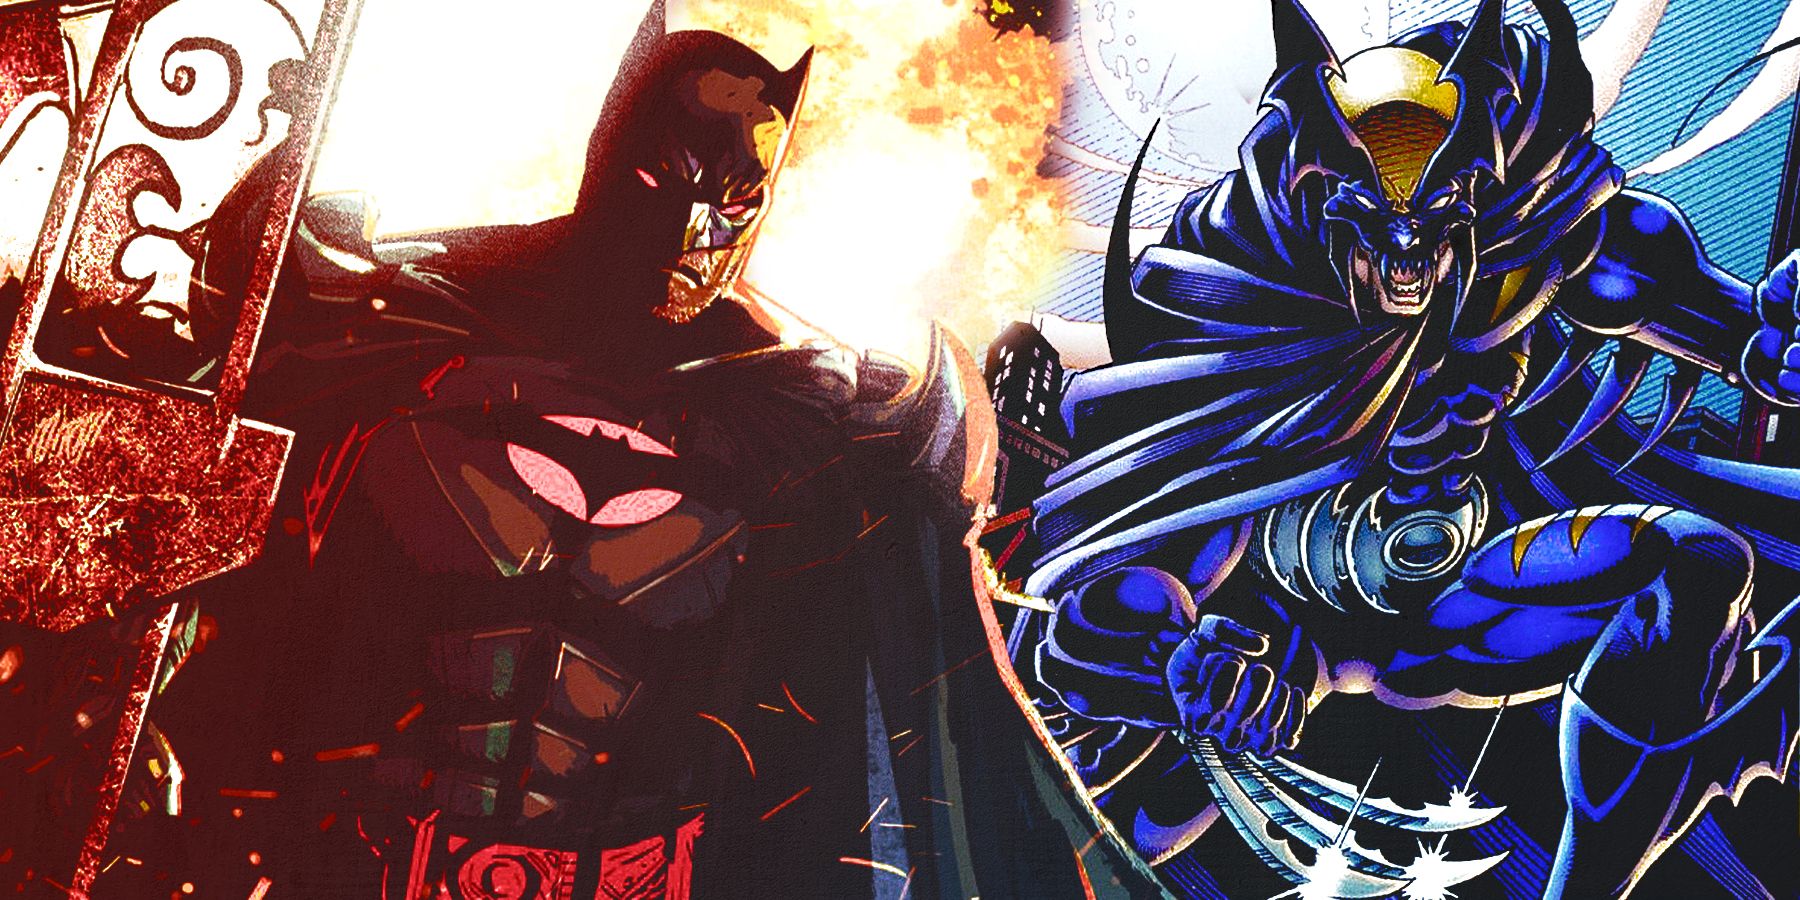 An image of collage of two alternate versions of Batman from DC Comics